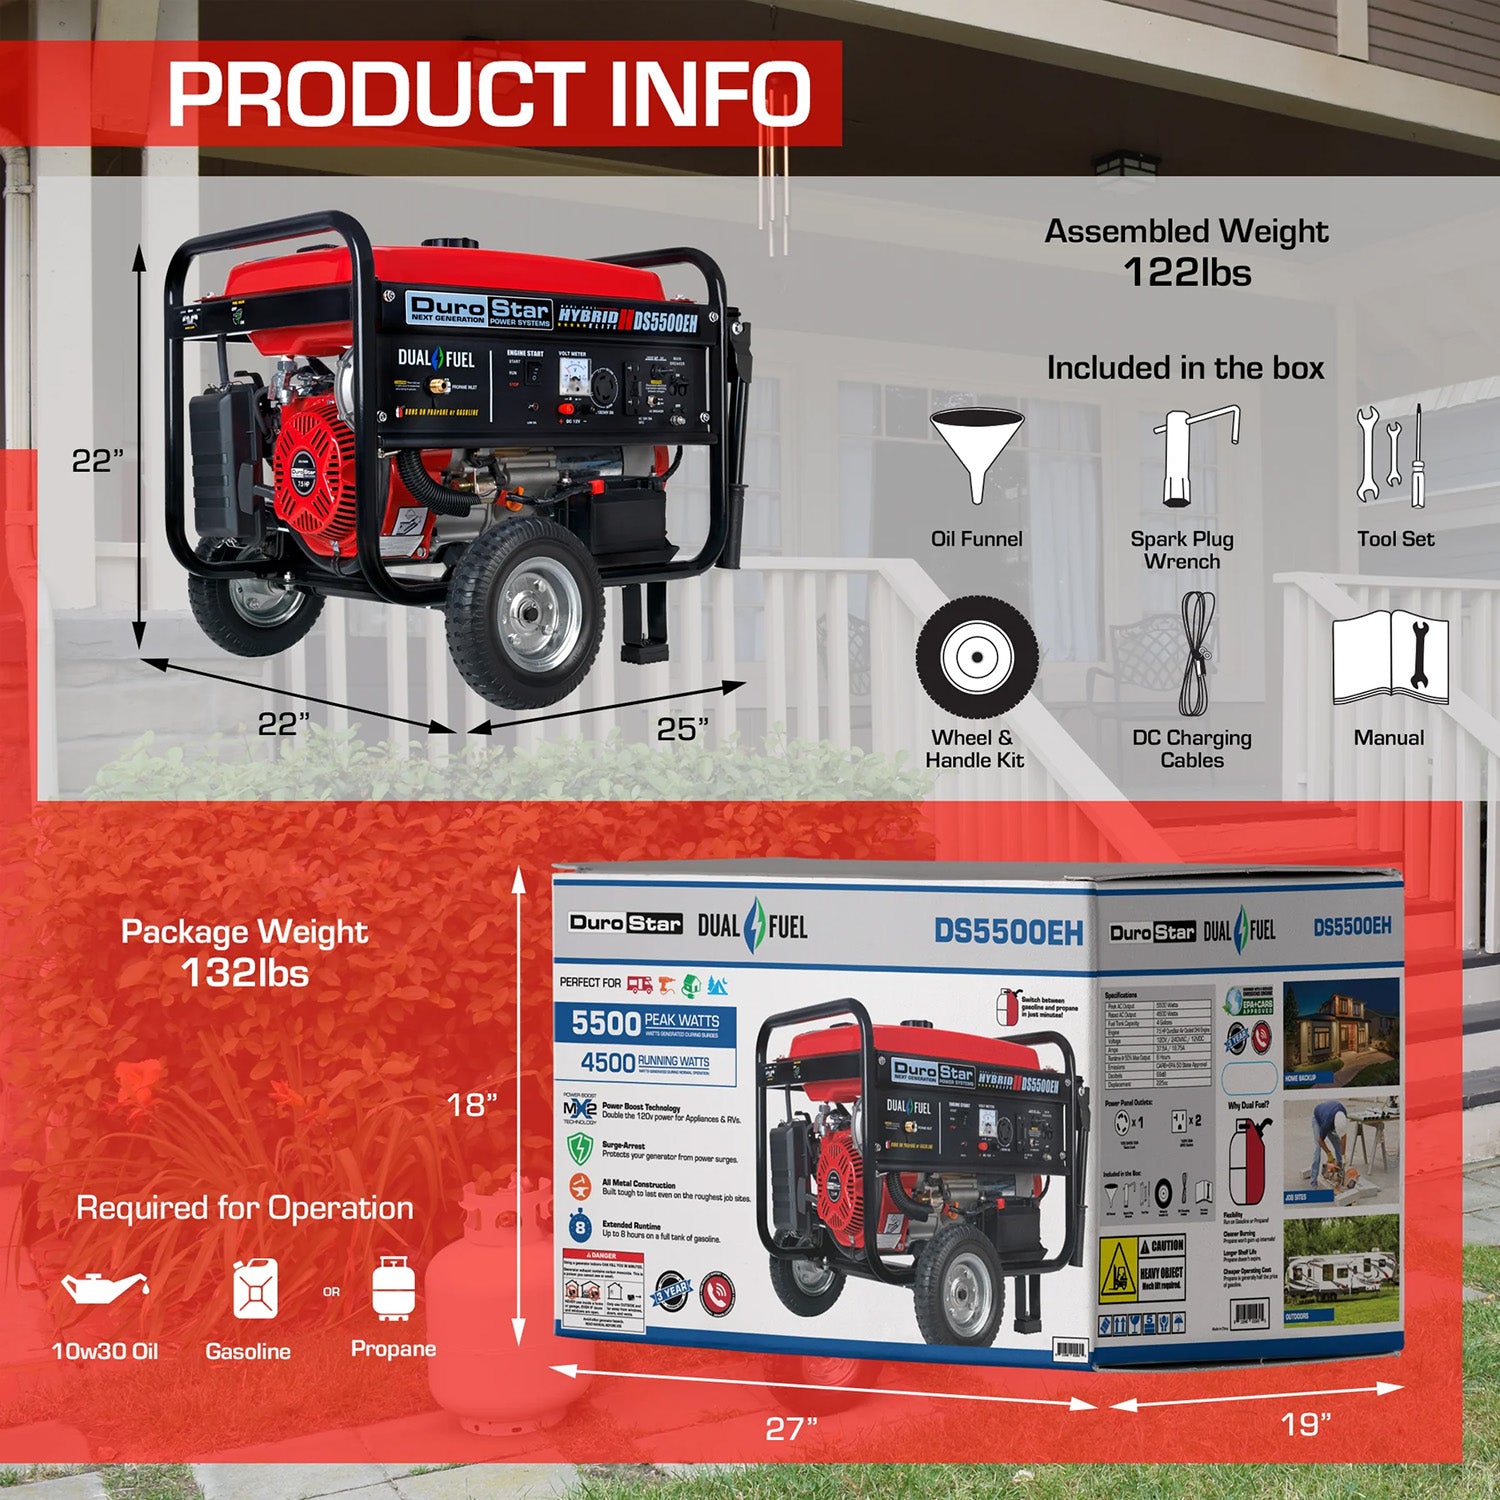 DuroStar DS5500EH Dual Fuel Portable Generator Product Information